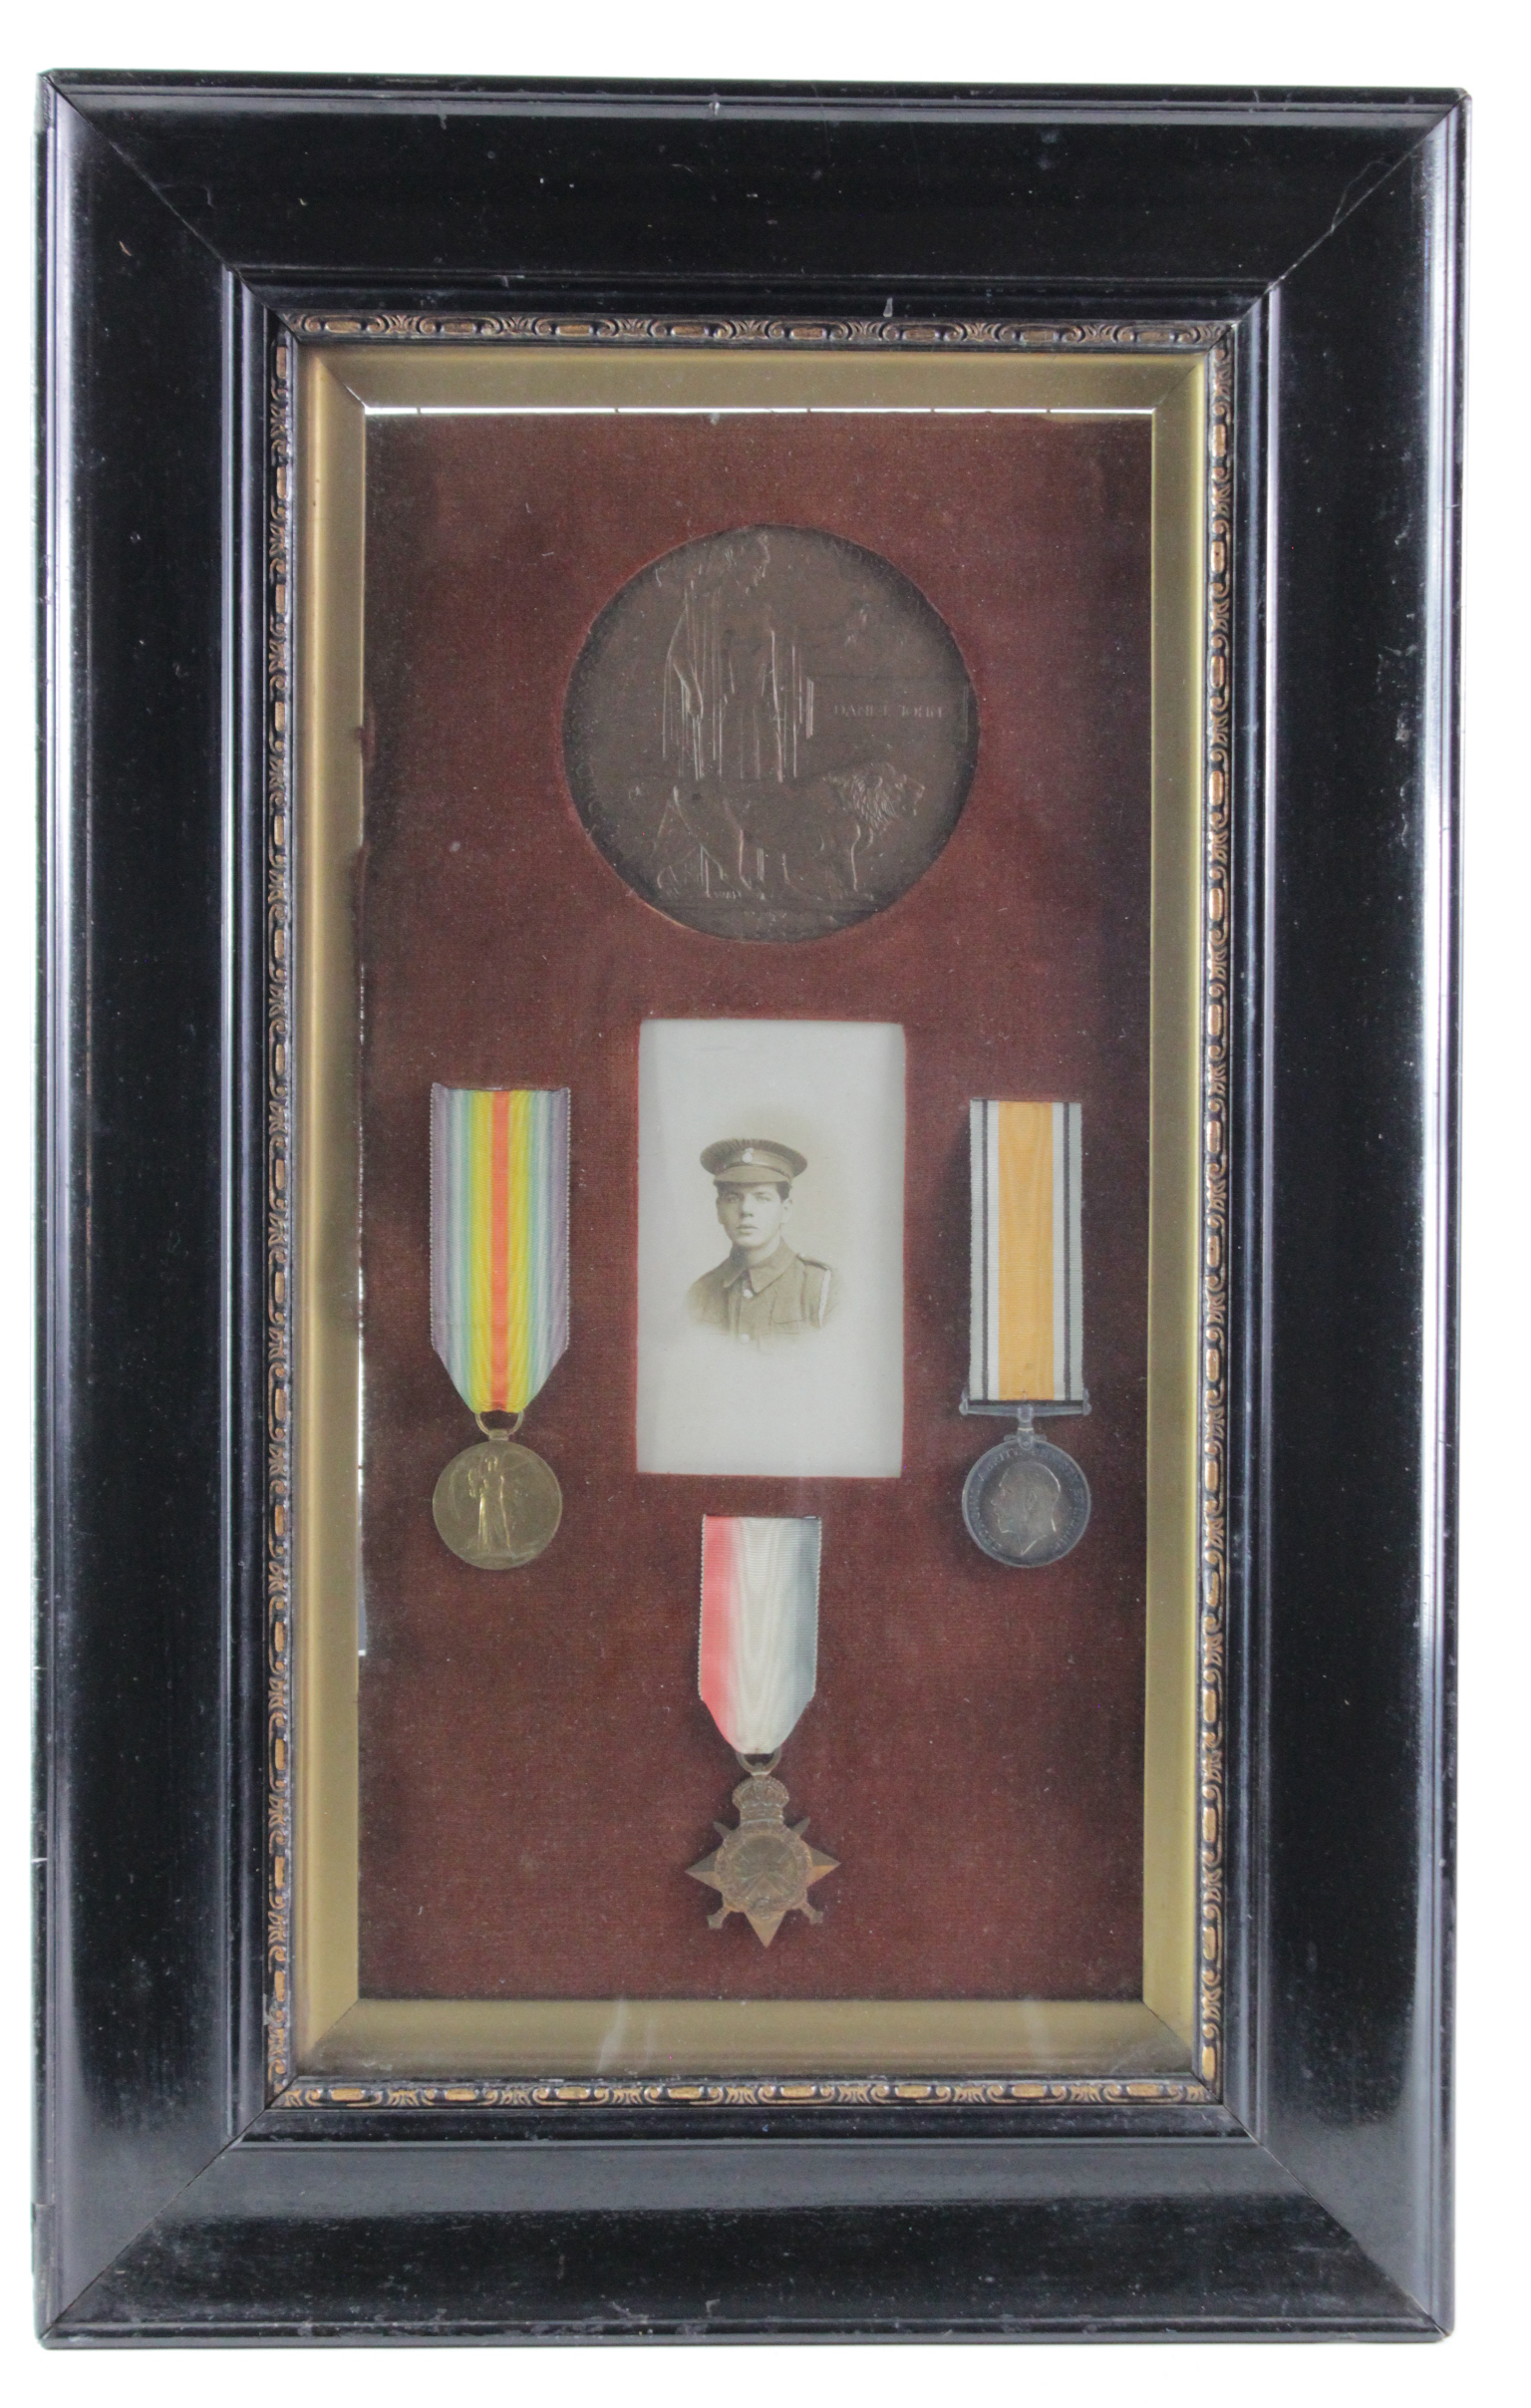 1915 Star Trio, Death Plaque and photo in old glazed frame, to 26283 Pte Daniel John Royal Welsh